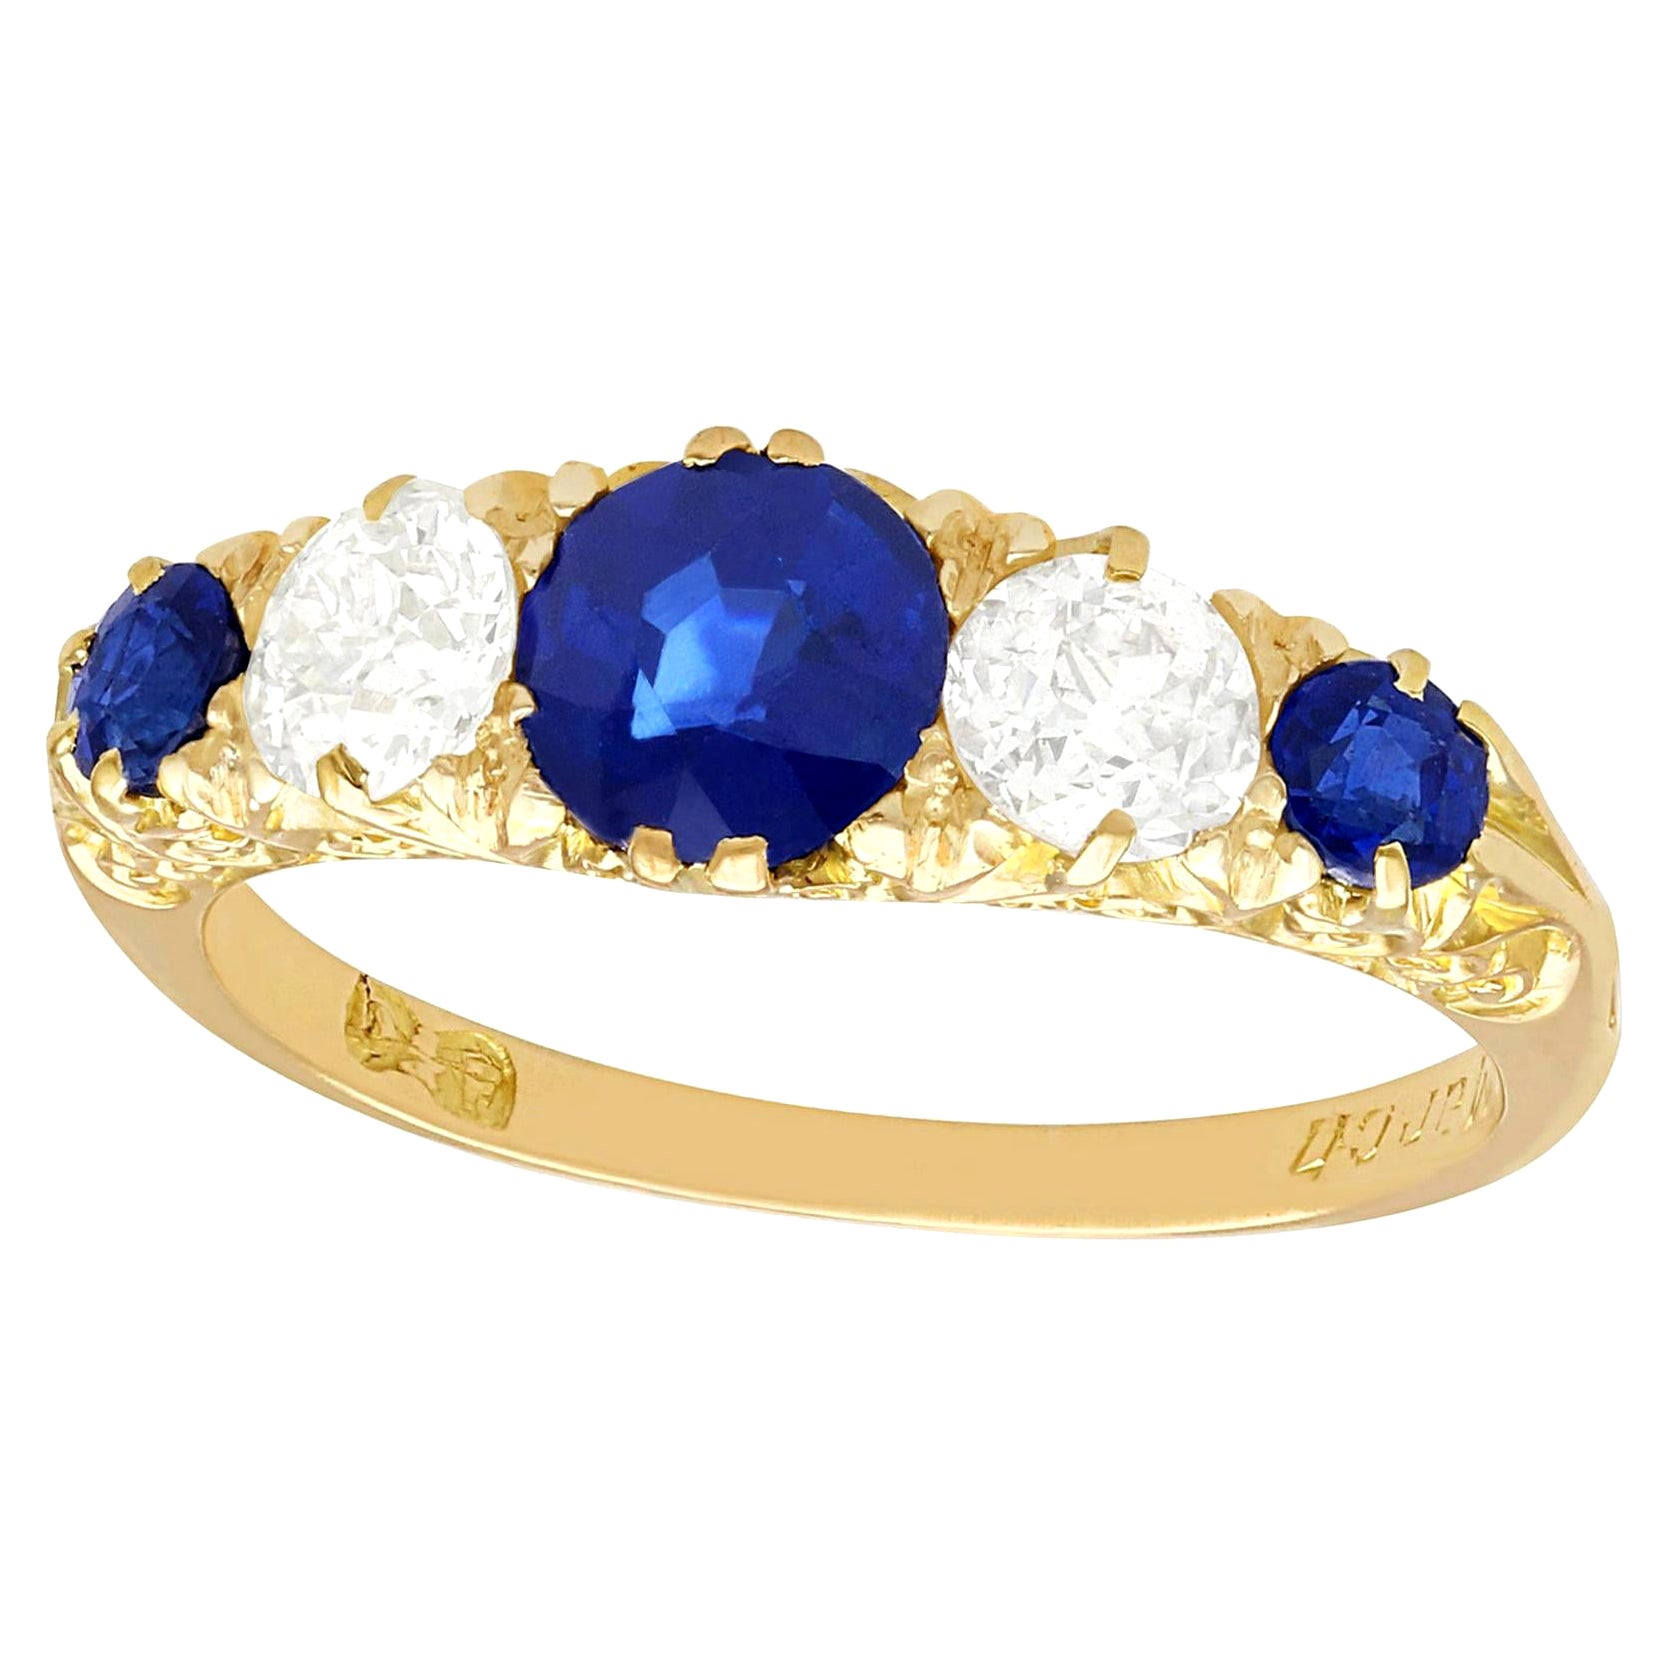 Antique 1.39 Carat Sapphire and Diamond Yellow Gold Five-Stone Ring